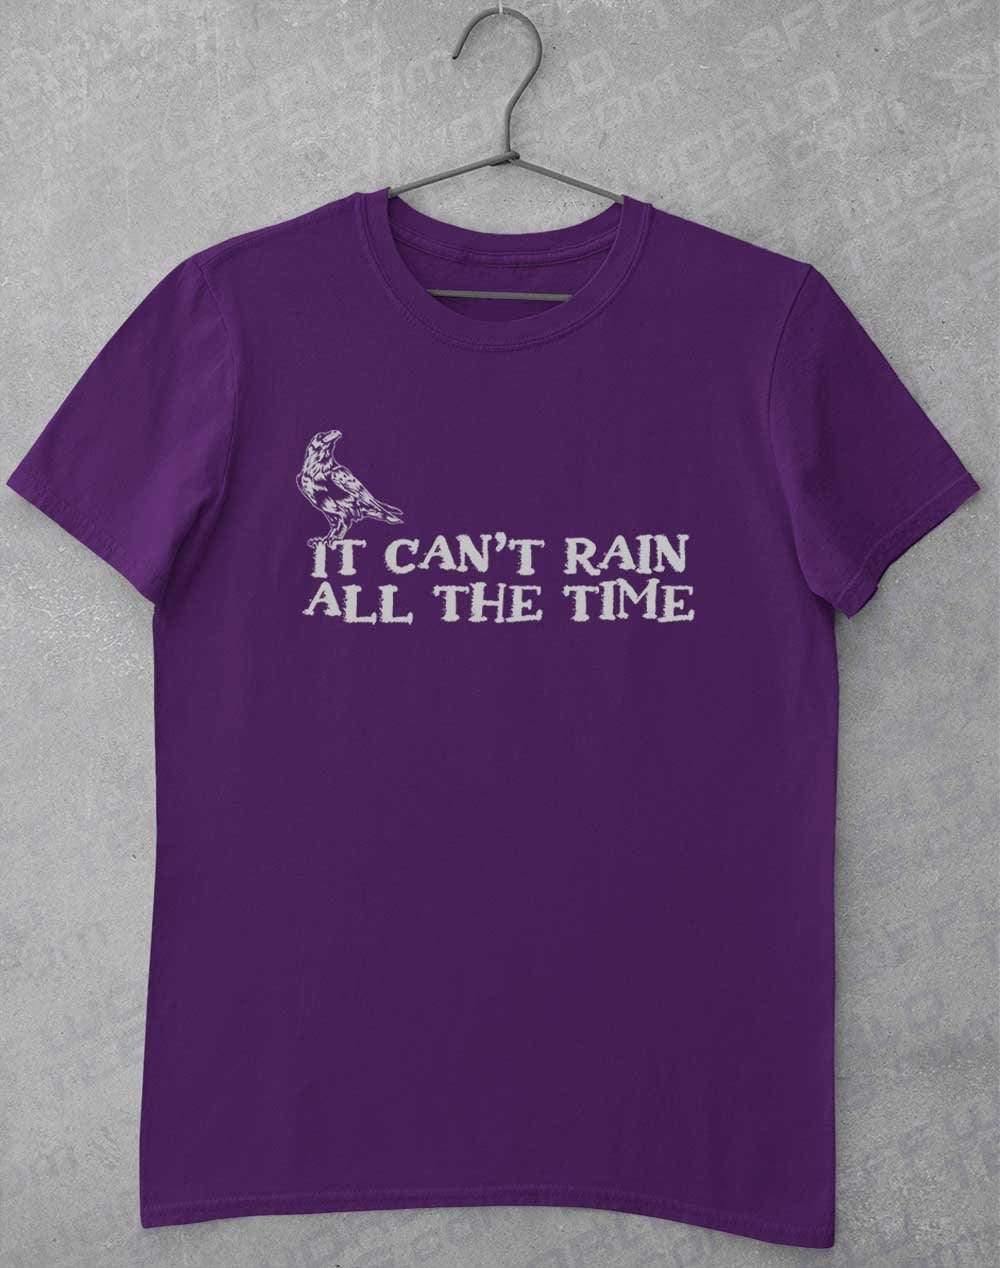 It Can't Rain All the Time T-Shirt S / Purple  - Off World Tees